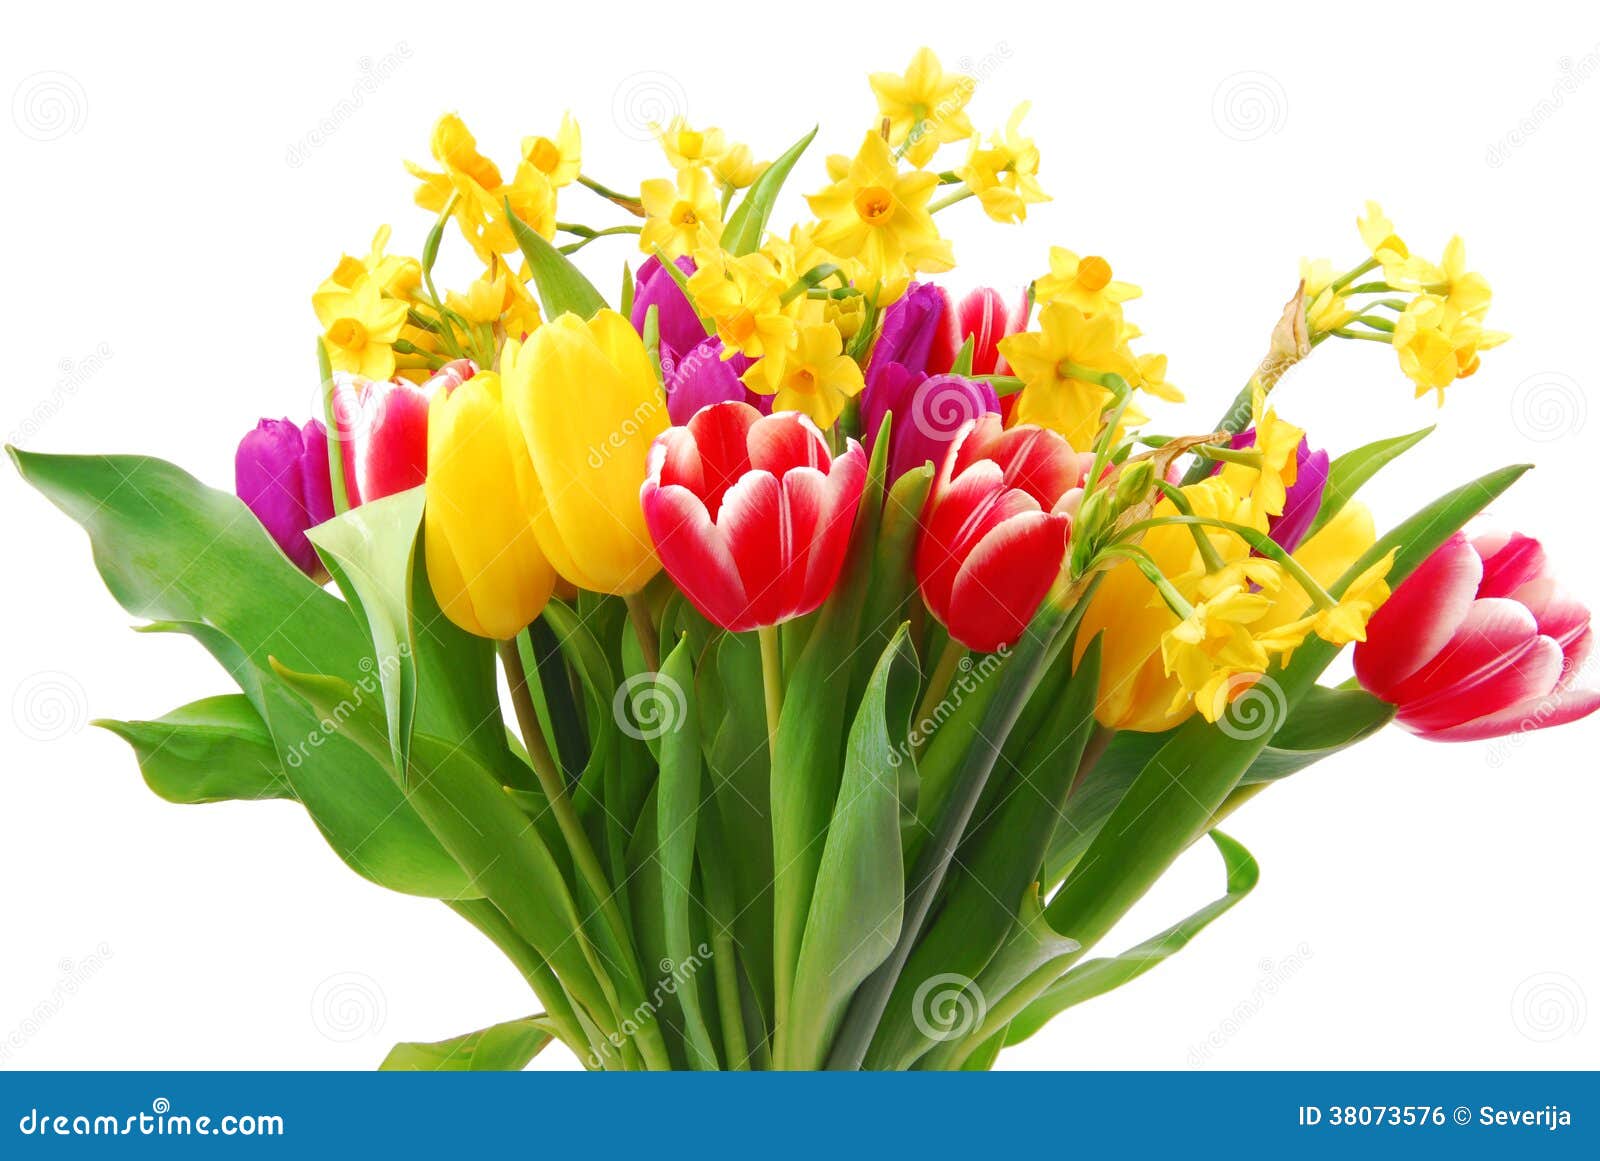 Tulip and daffodil stock photo. Image of easter, flower - 38073576